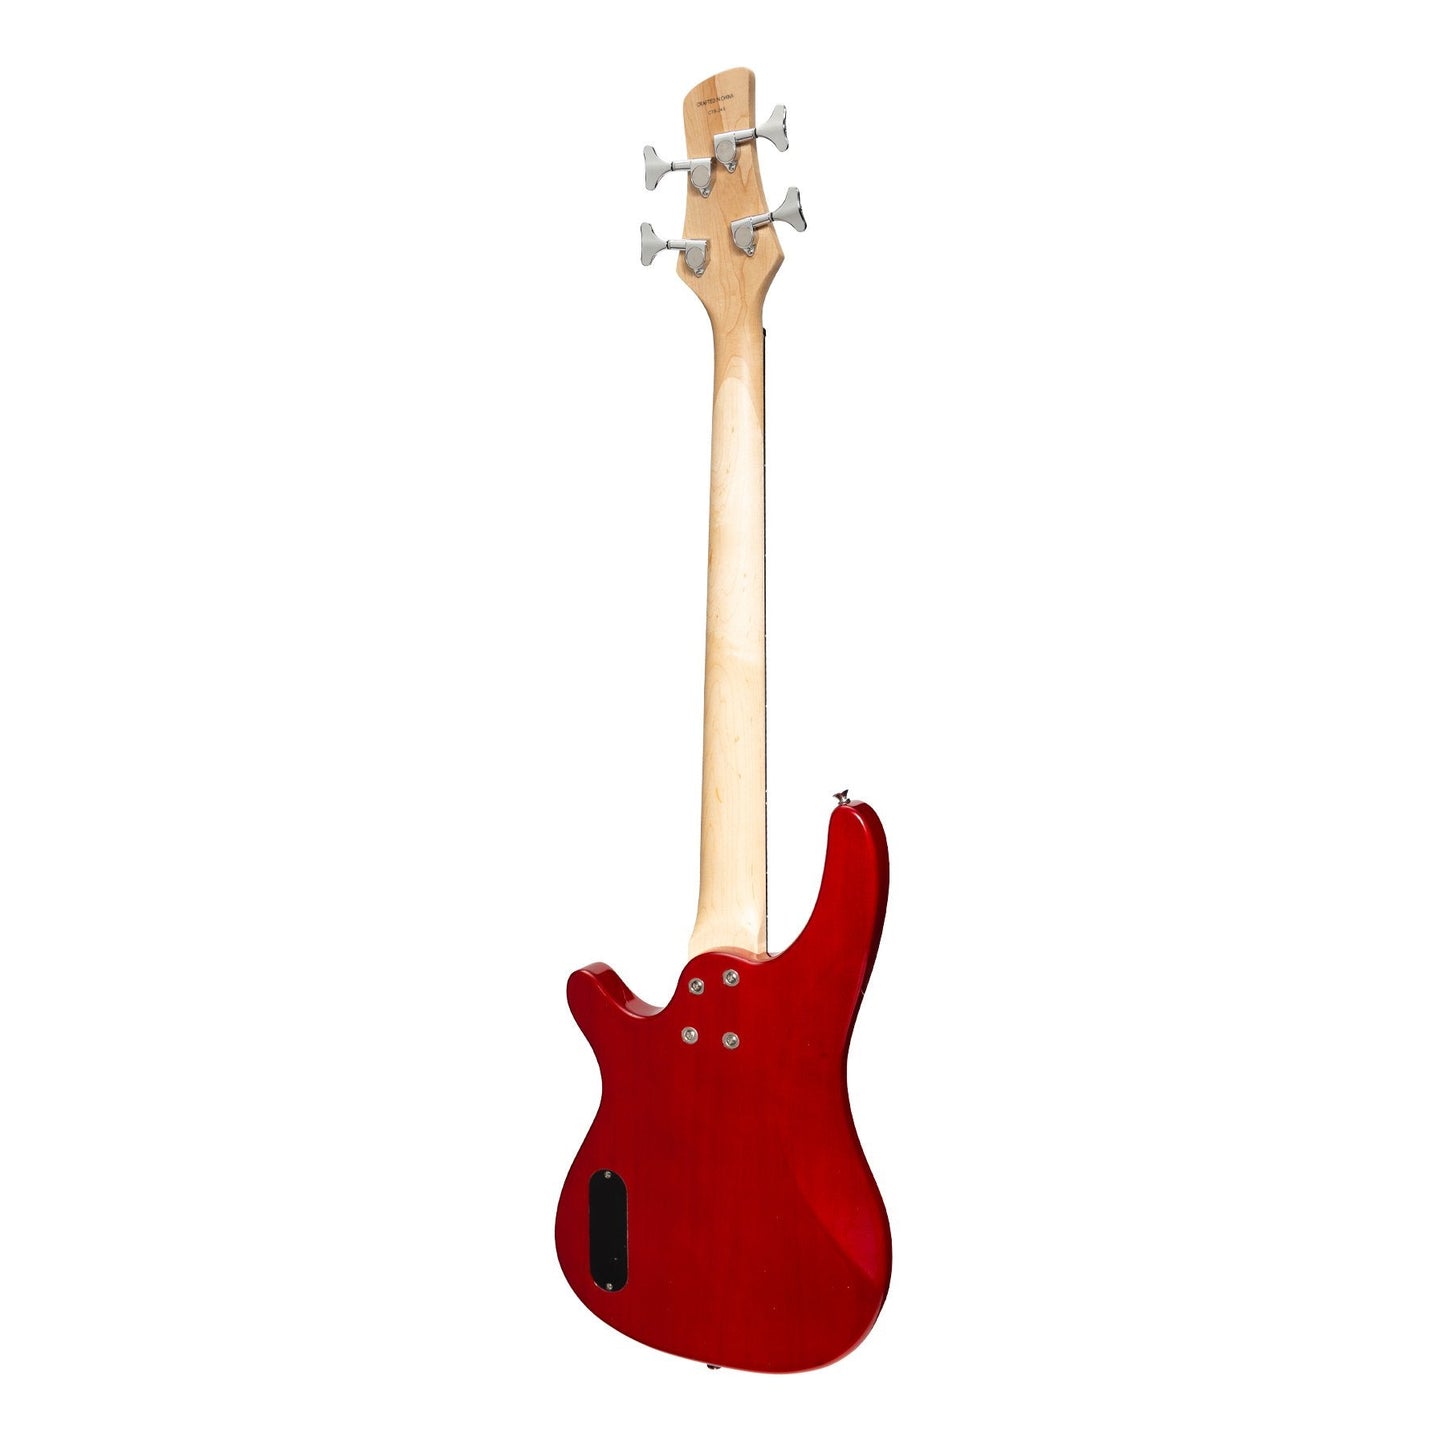 Casino '24 Series' Short Scale Tune-Style Electric Bass Guitar and 15 Watt Amplifier Pack (Transparent Wine Red)